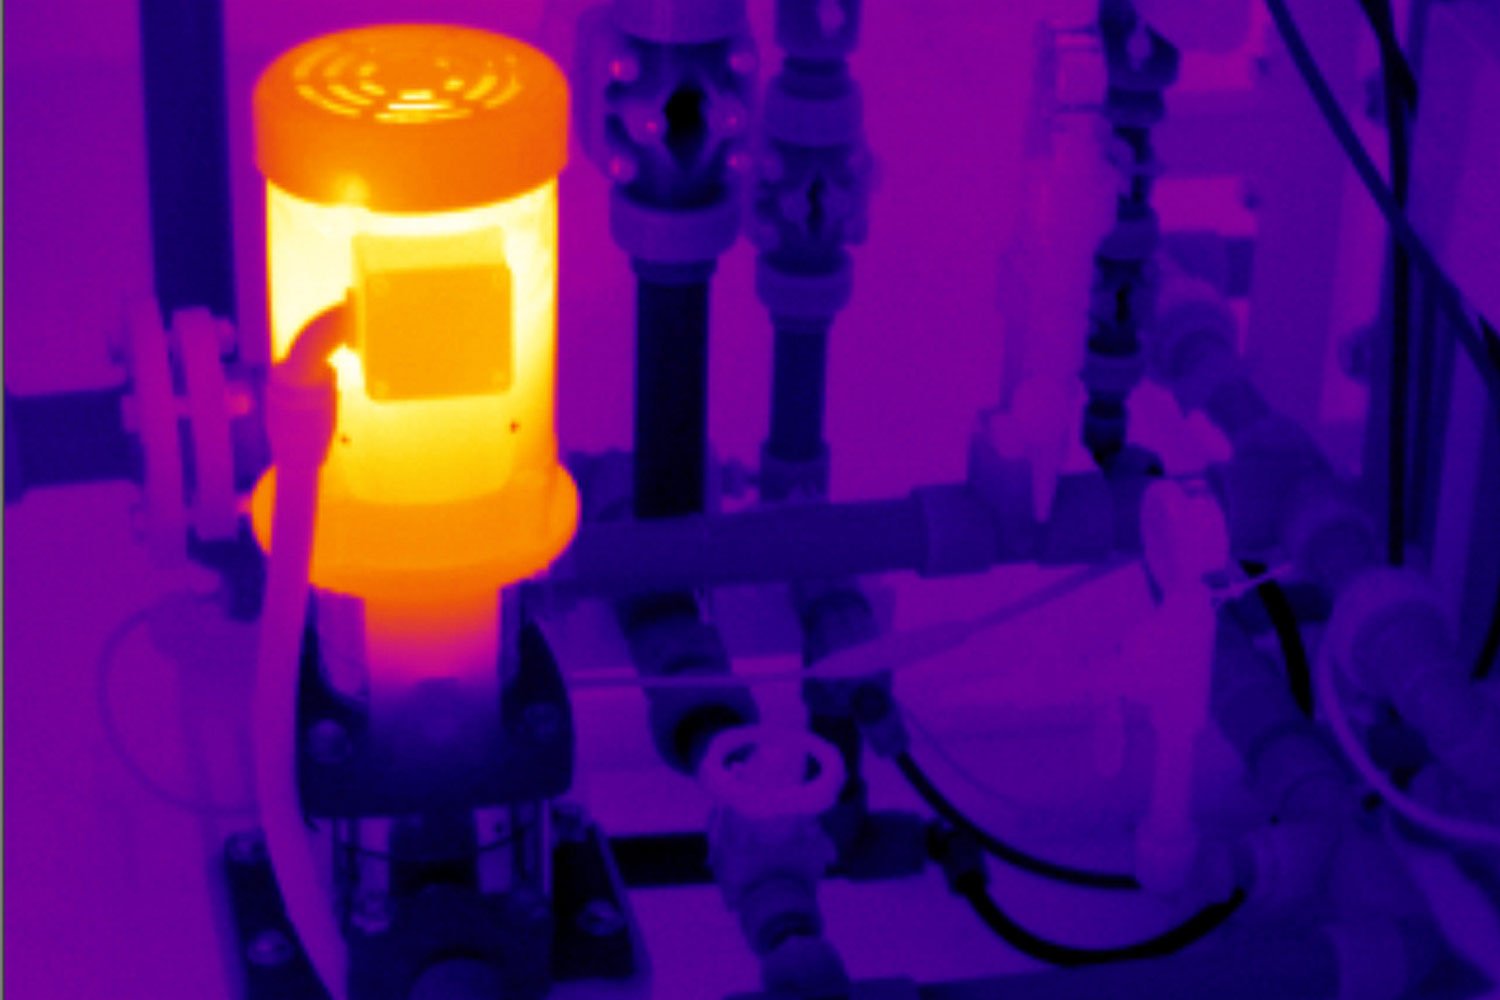 Thermography Services & Thermal Imaging Leak Detection Systems UK